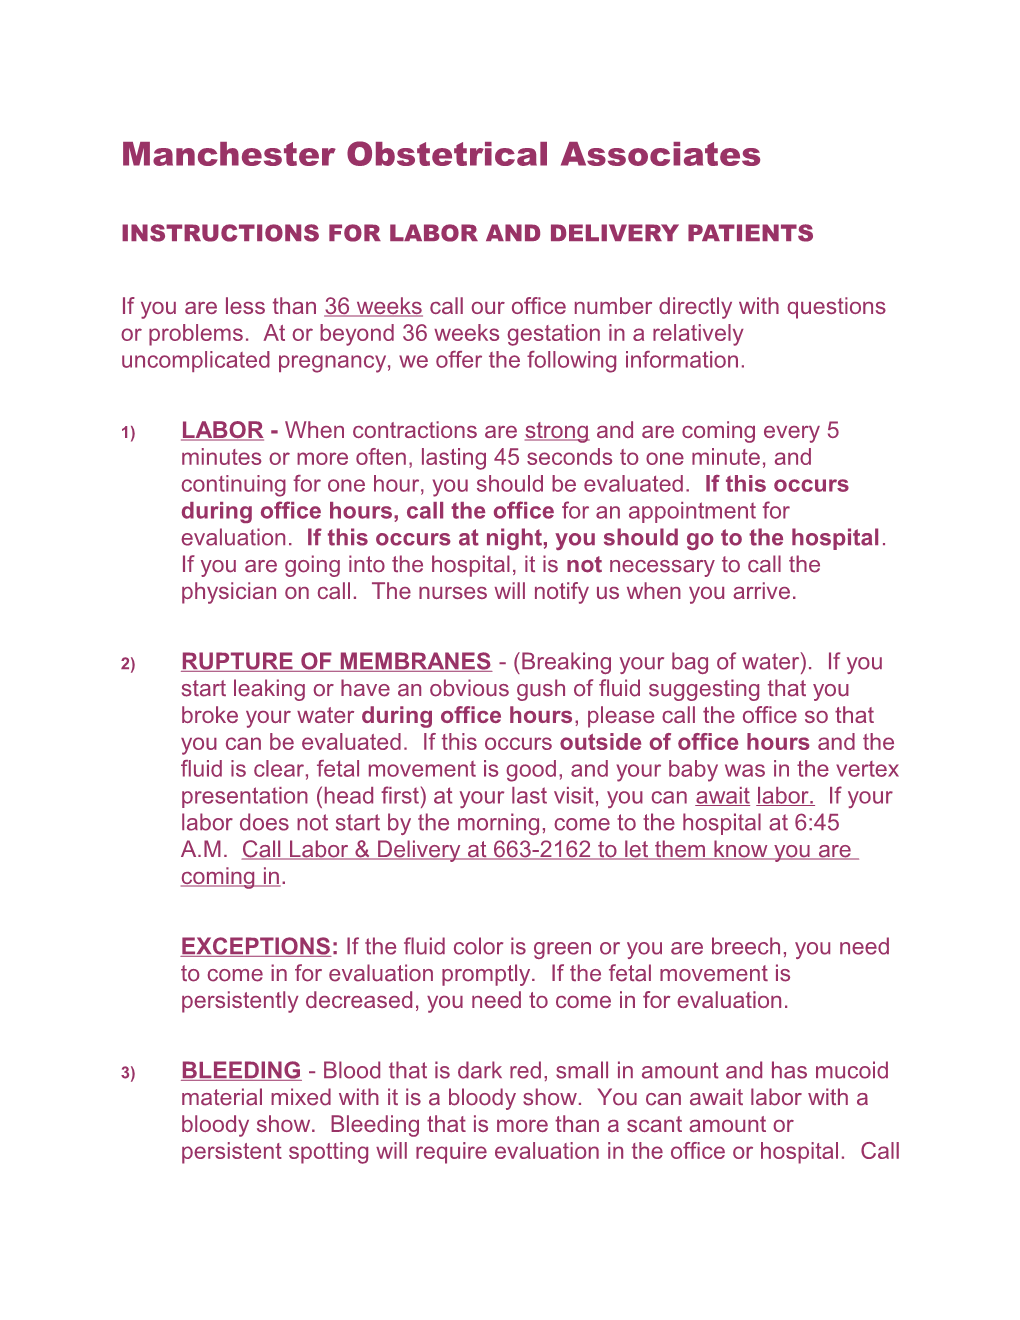 Instructions for Labor and Delivery Patients